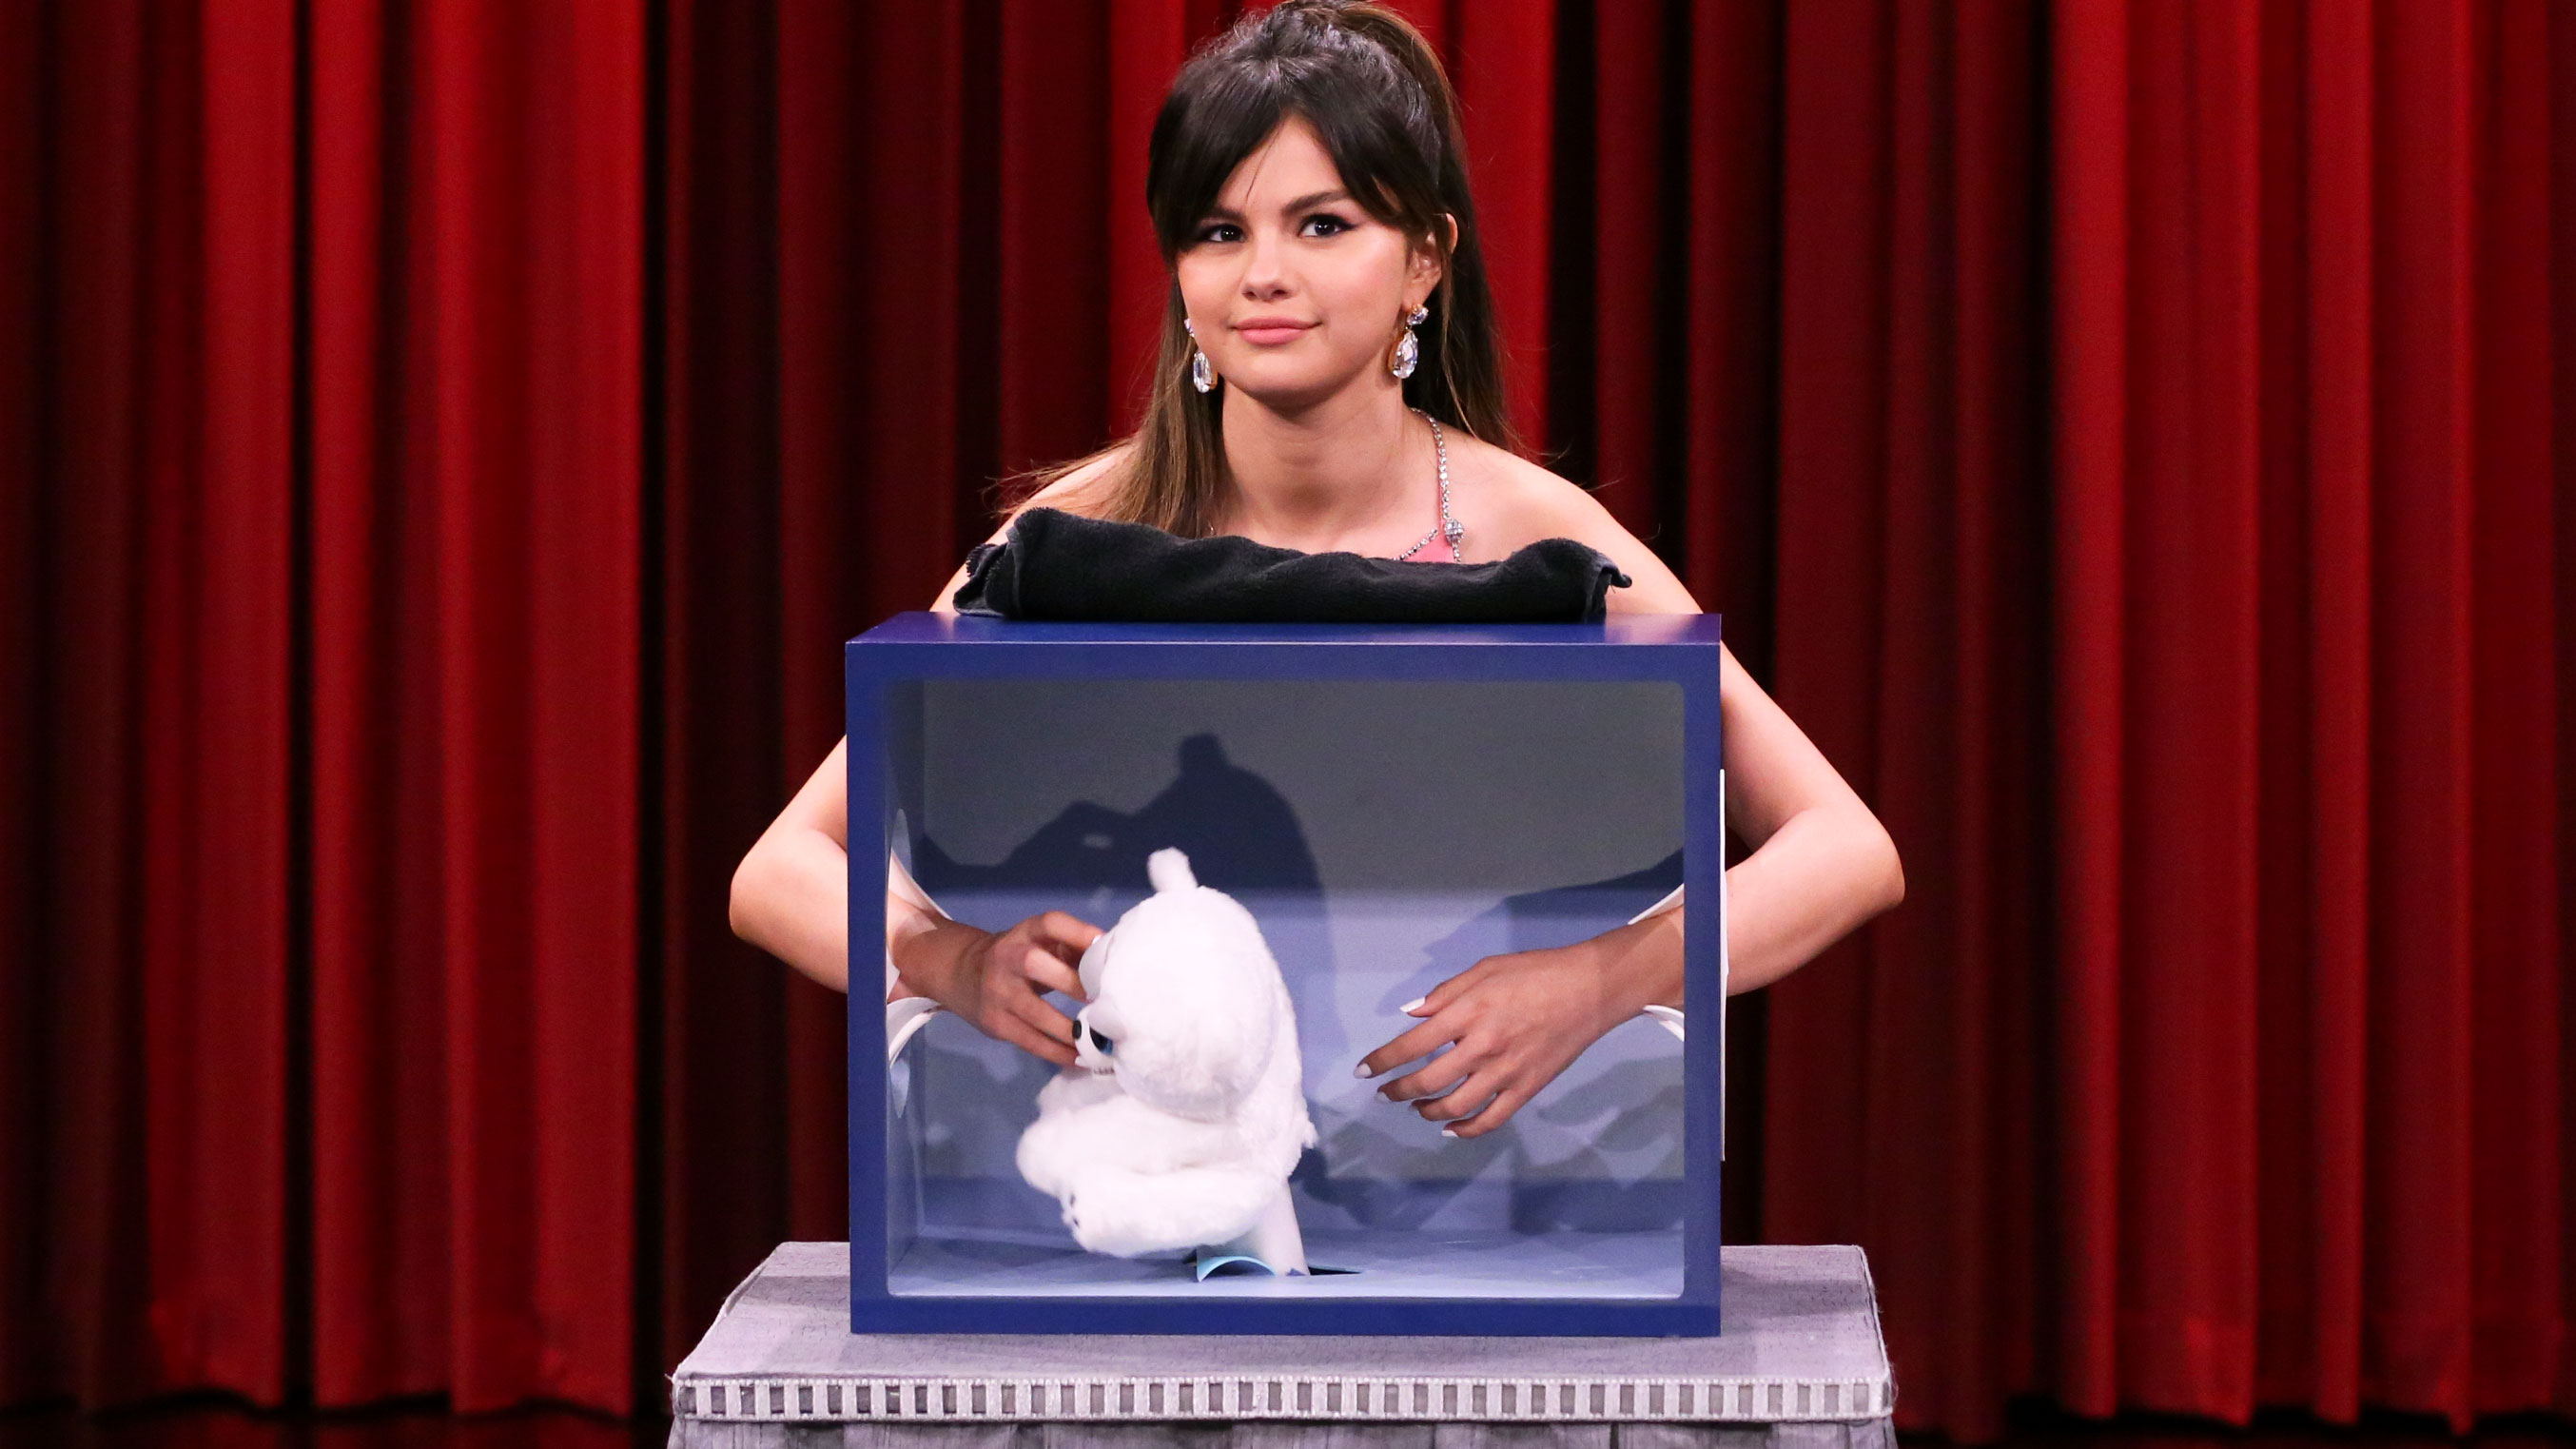 Watch The Tonight Show Starring Jimmy Fallon Highlight: Can You Feel It? with Selena ...2708 x 1523